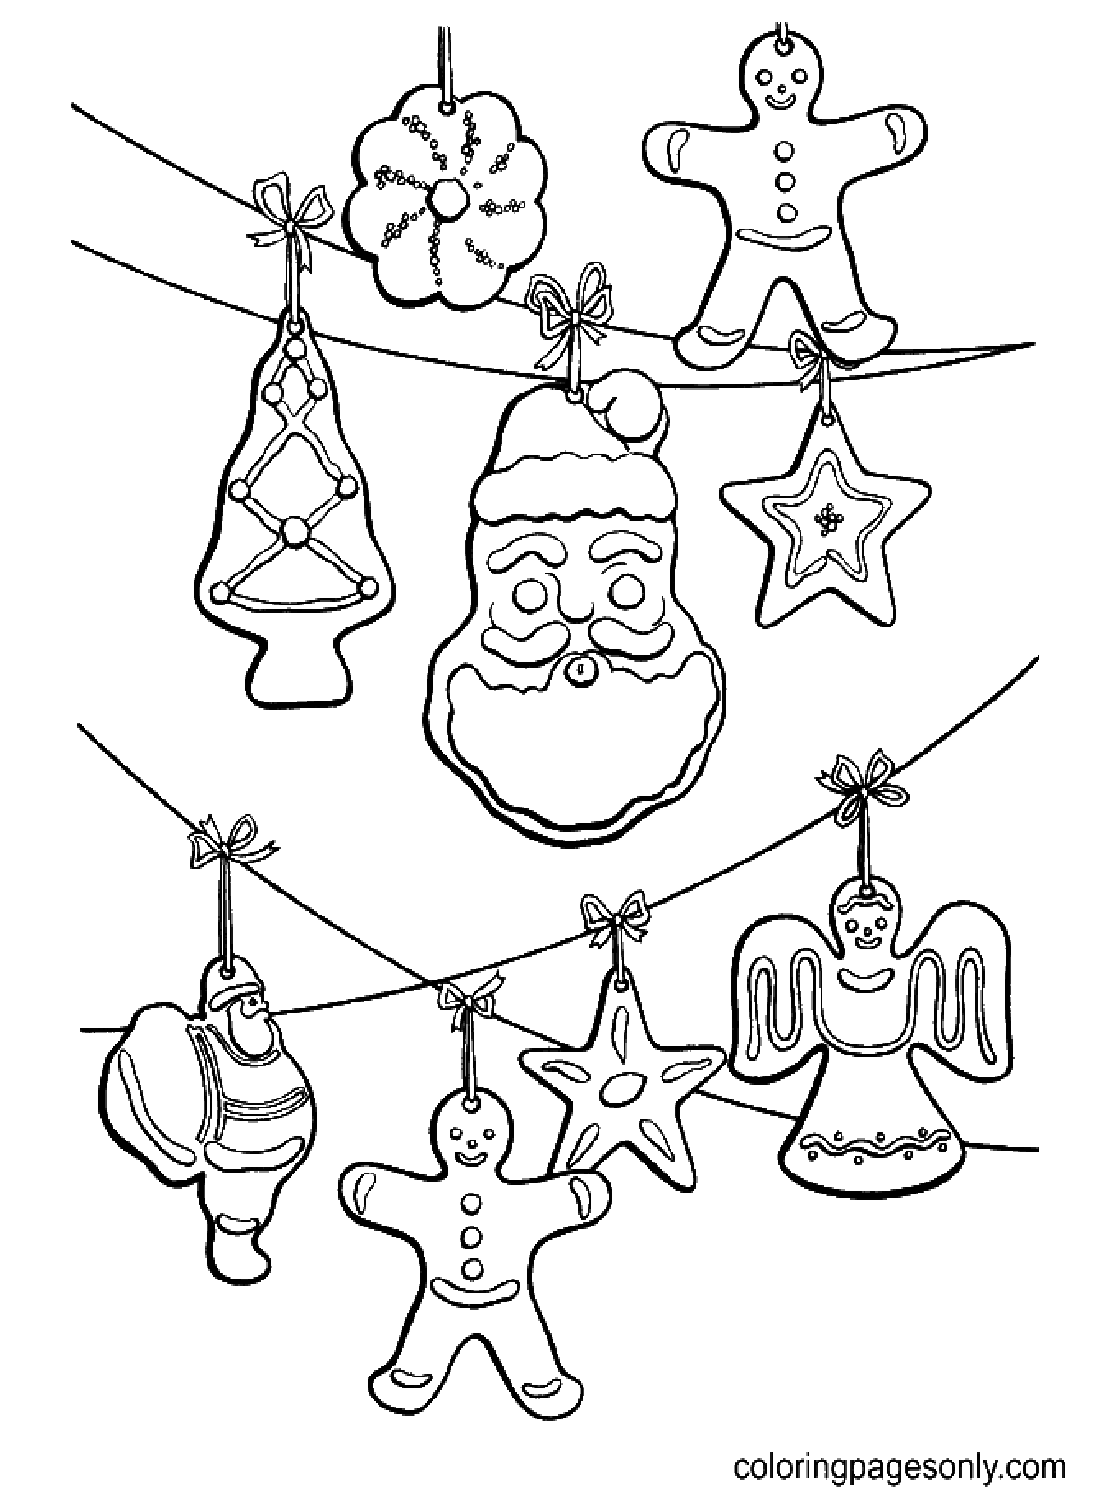 Christmas Ornaments from Christmas Ornaments